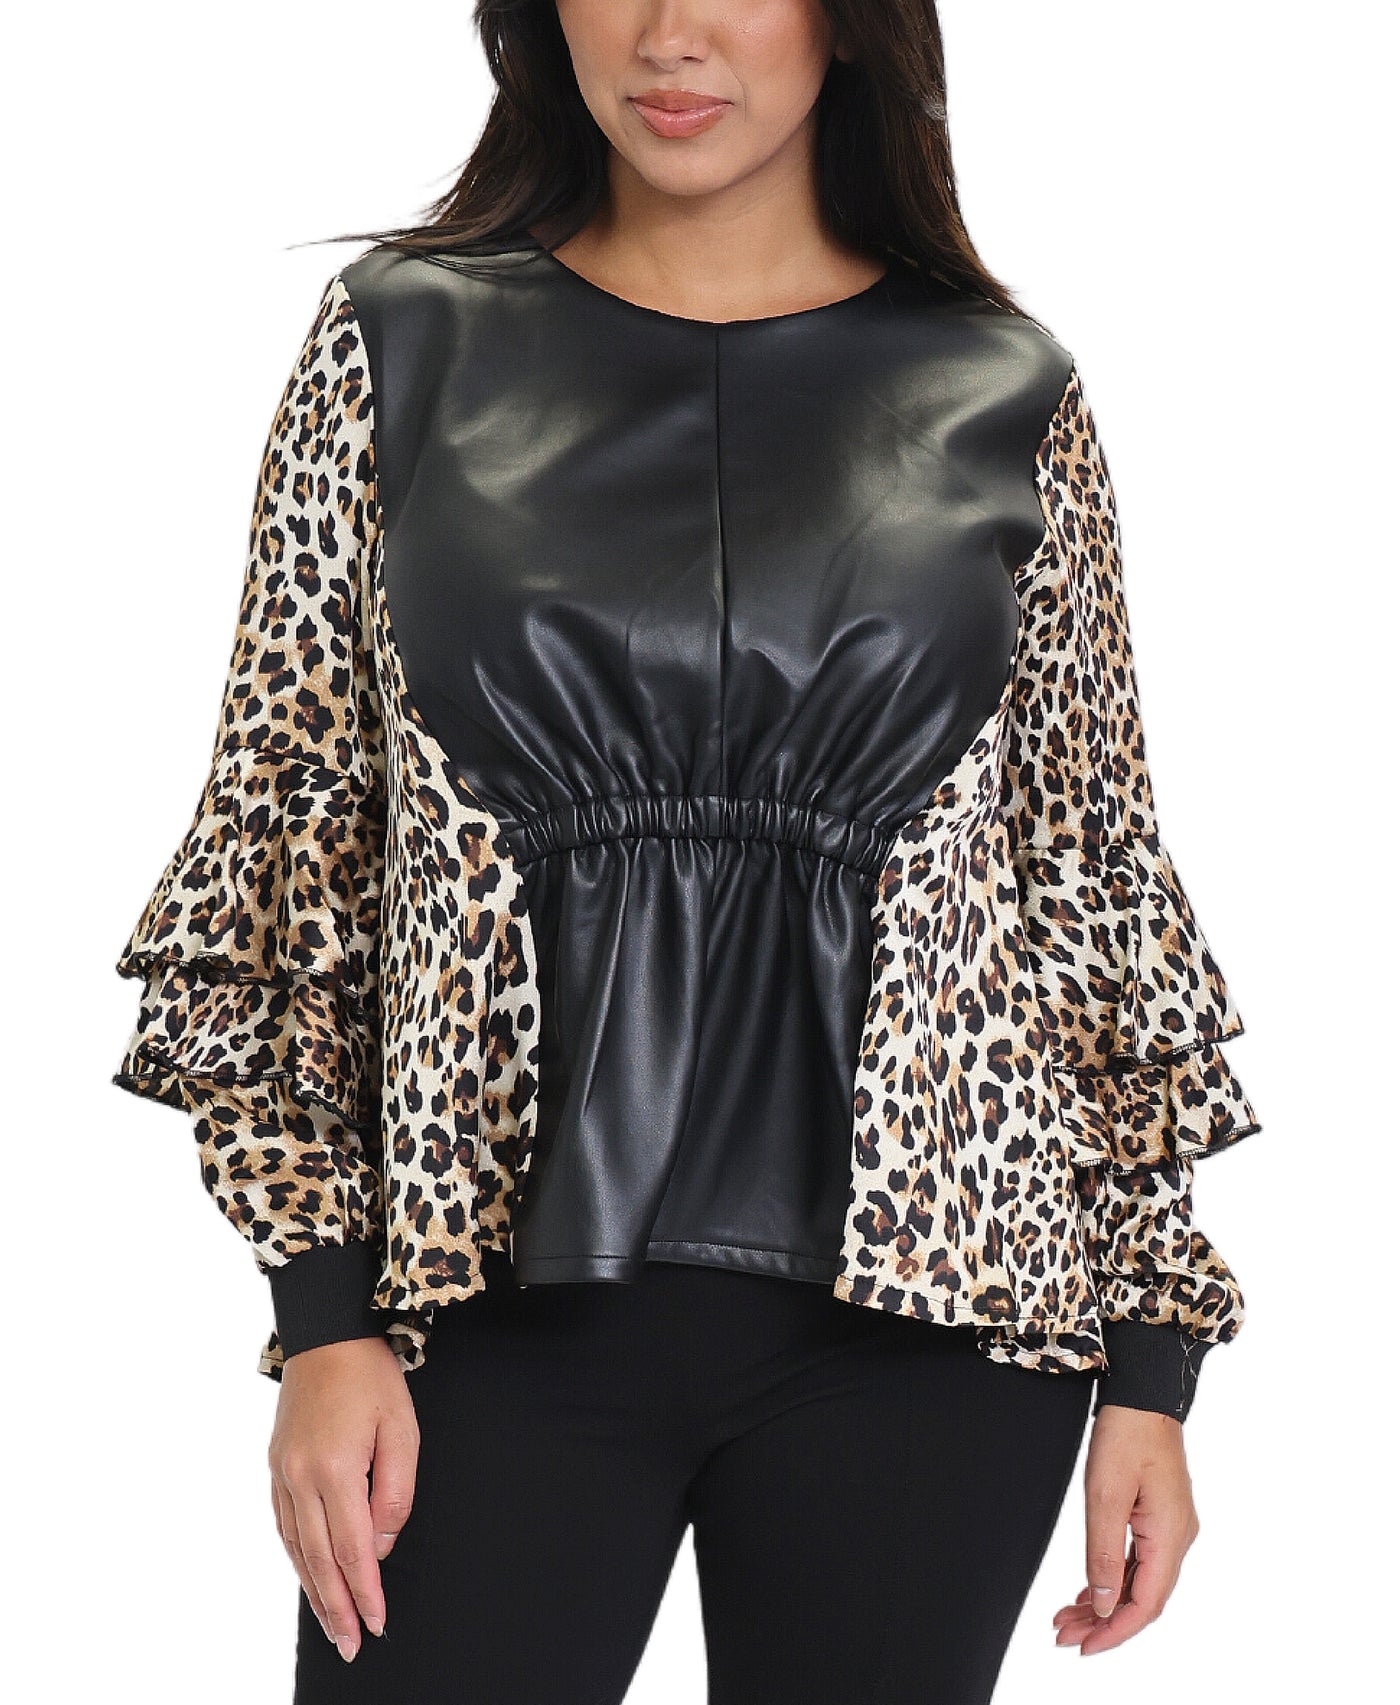 Animal Print & Faux Leather Blouse image 1